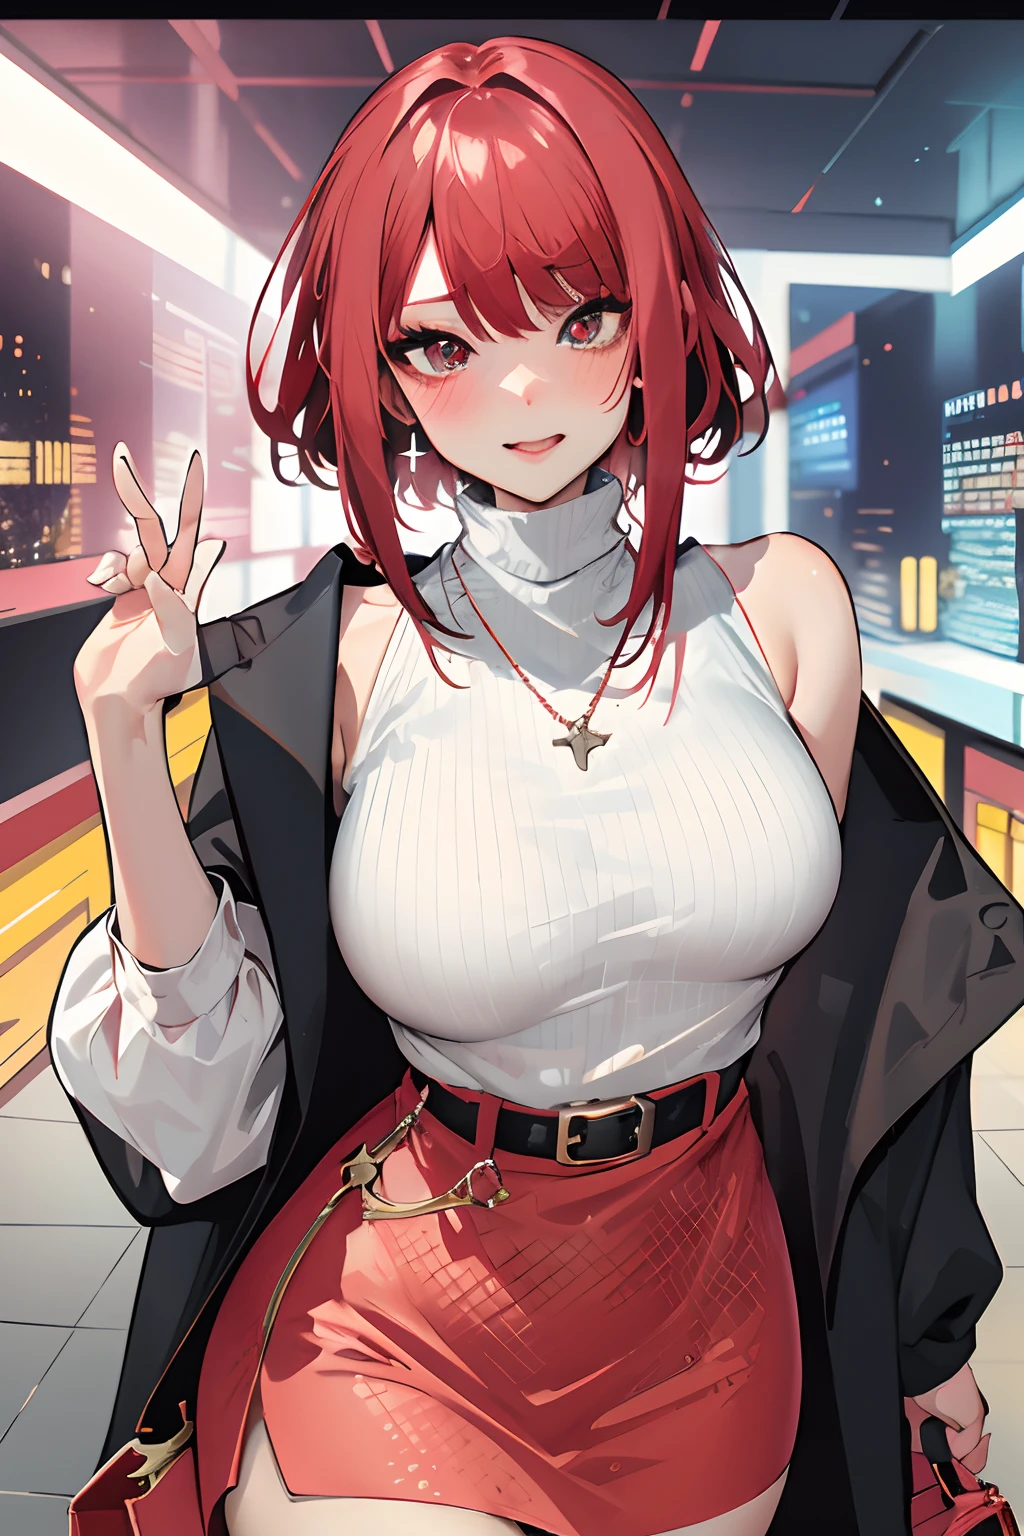 masutepiece, Best Quality, pixiv, Cowboy Shot, Red hair,
1girl in, breasts, blush, Sleeveless,Jewelry, Looking at Viewer, Skirt, Necklace, Solo, Bag, Sweaters, turtle neck, sleeveless turtleneck, Jacket, Sleeveless sweater, Long skirt, Medium Hair, Handbag、Confident rich woman standing in front of camera, Staring into the lens, Surrounded by a bustling recording scene with flashing lights, ,In the style of star art group Xing, 32K, Best Quality, masutepiece, Super Detail, high details,Girl in the video、Displayed on the monitor、(((pov))!